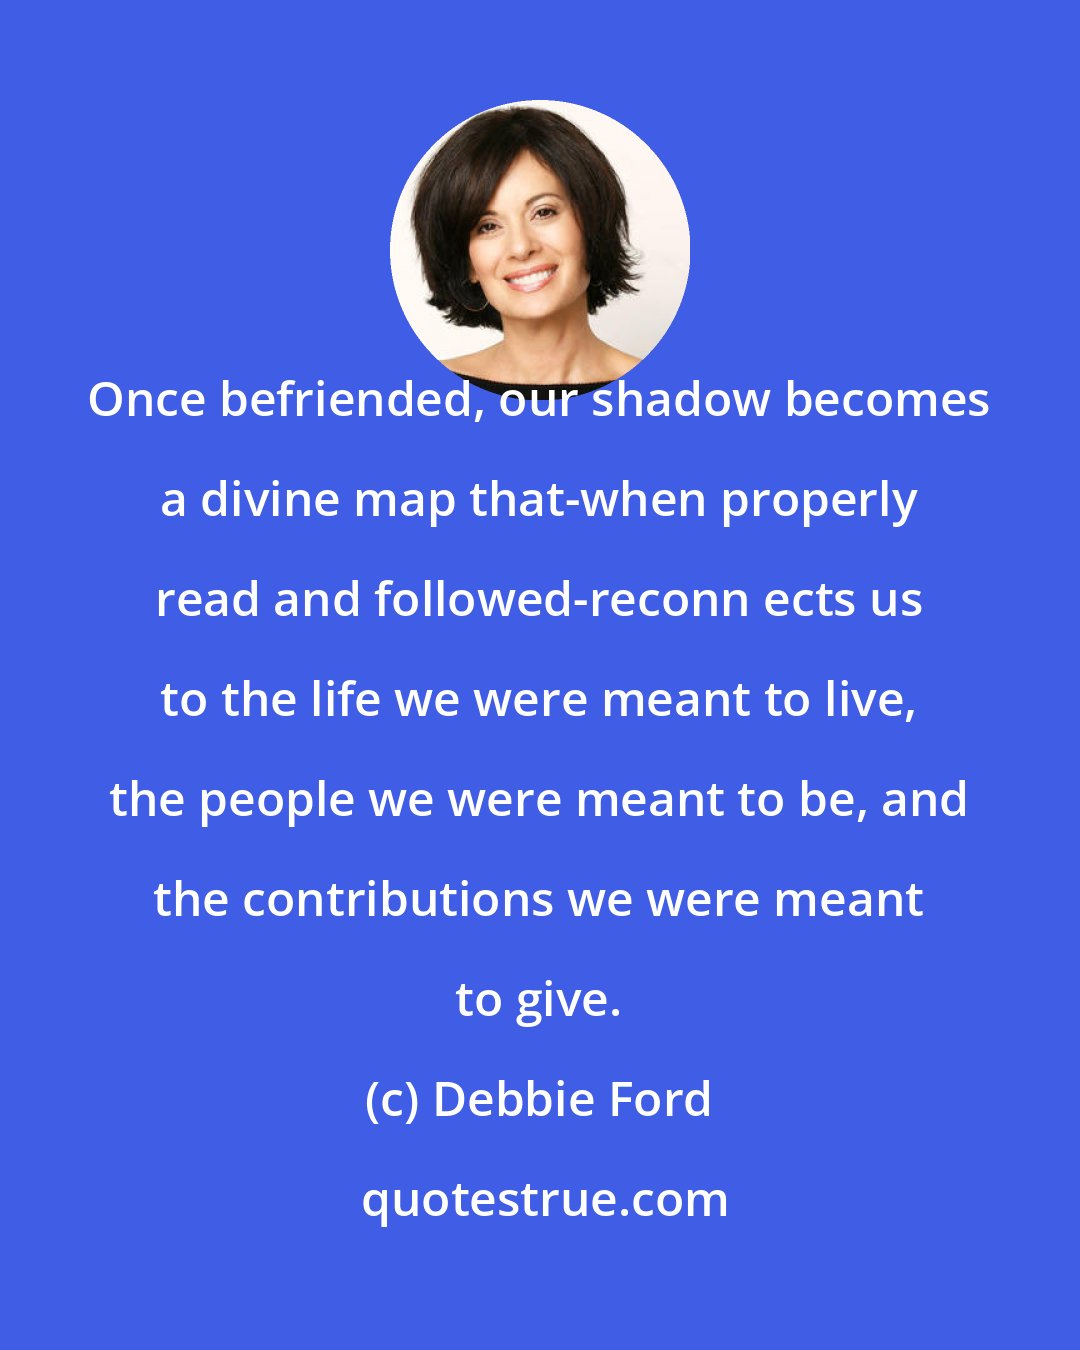 Debbie Ford: Once befriended, our shadow becomes a divine map that-when properly read and followed-reconn ects us to the life we were meant to live, the people we were meant to be, and the contributions we were meant to give.